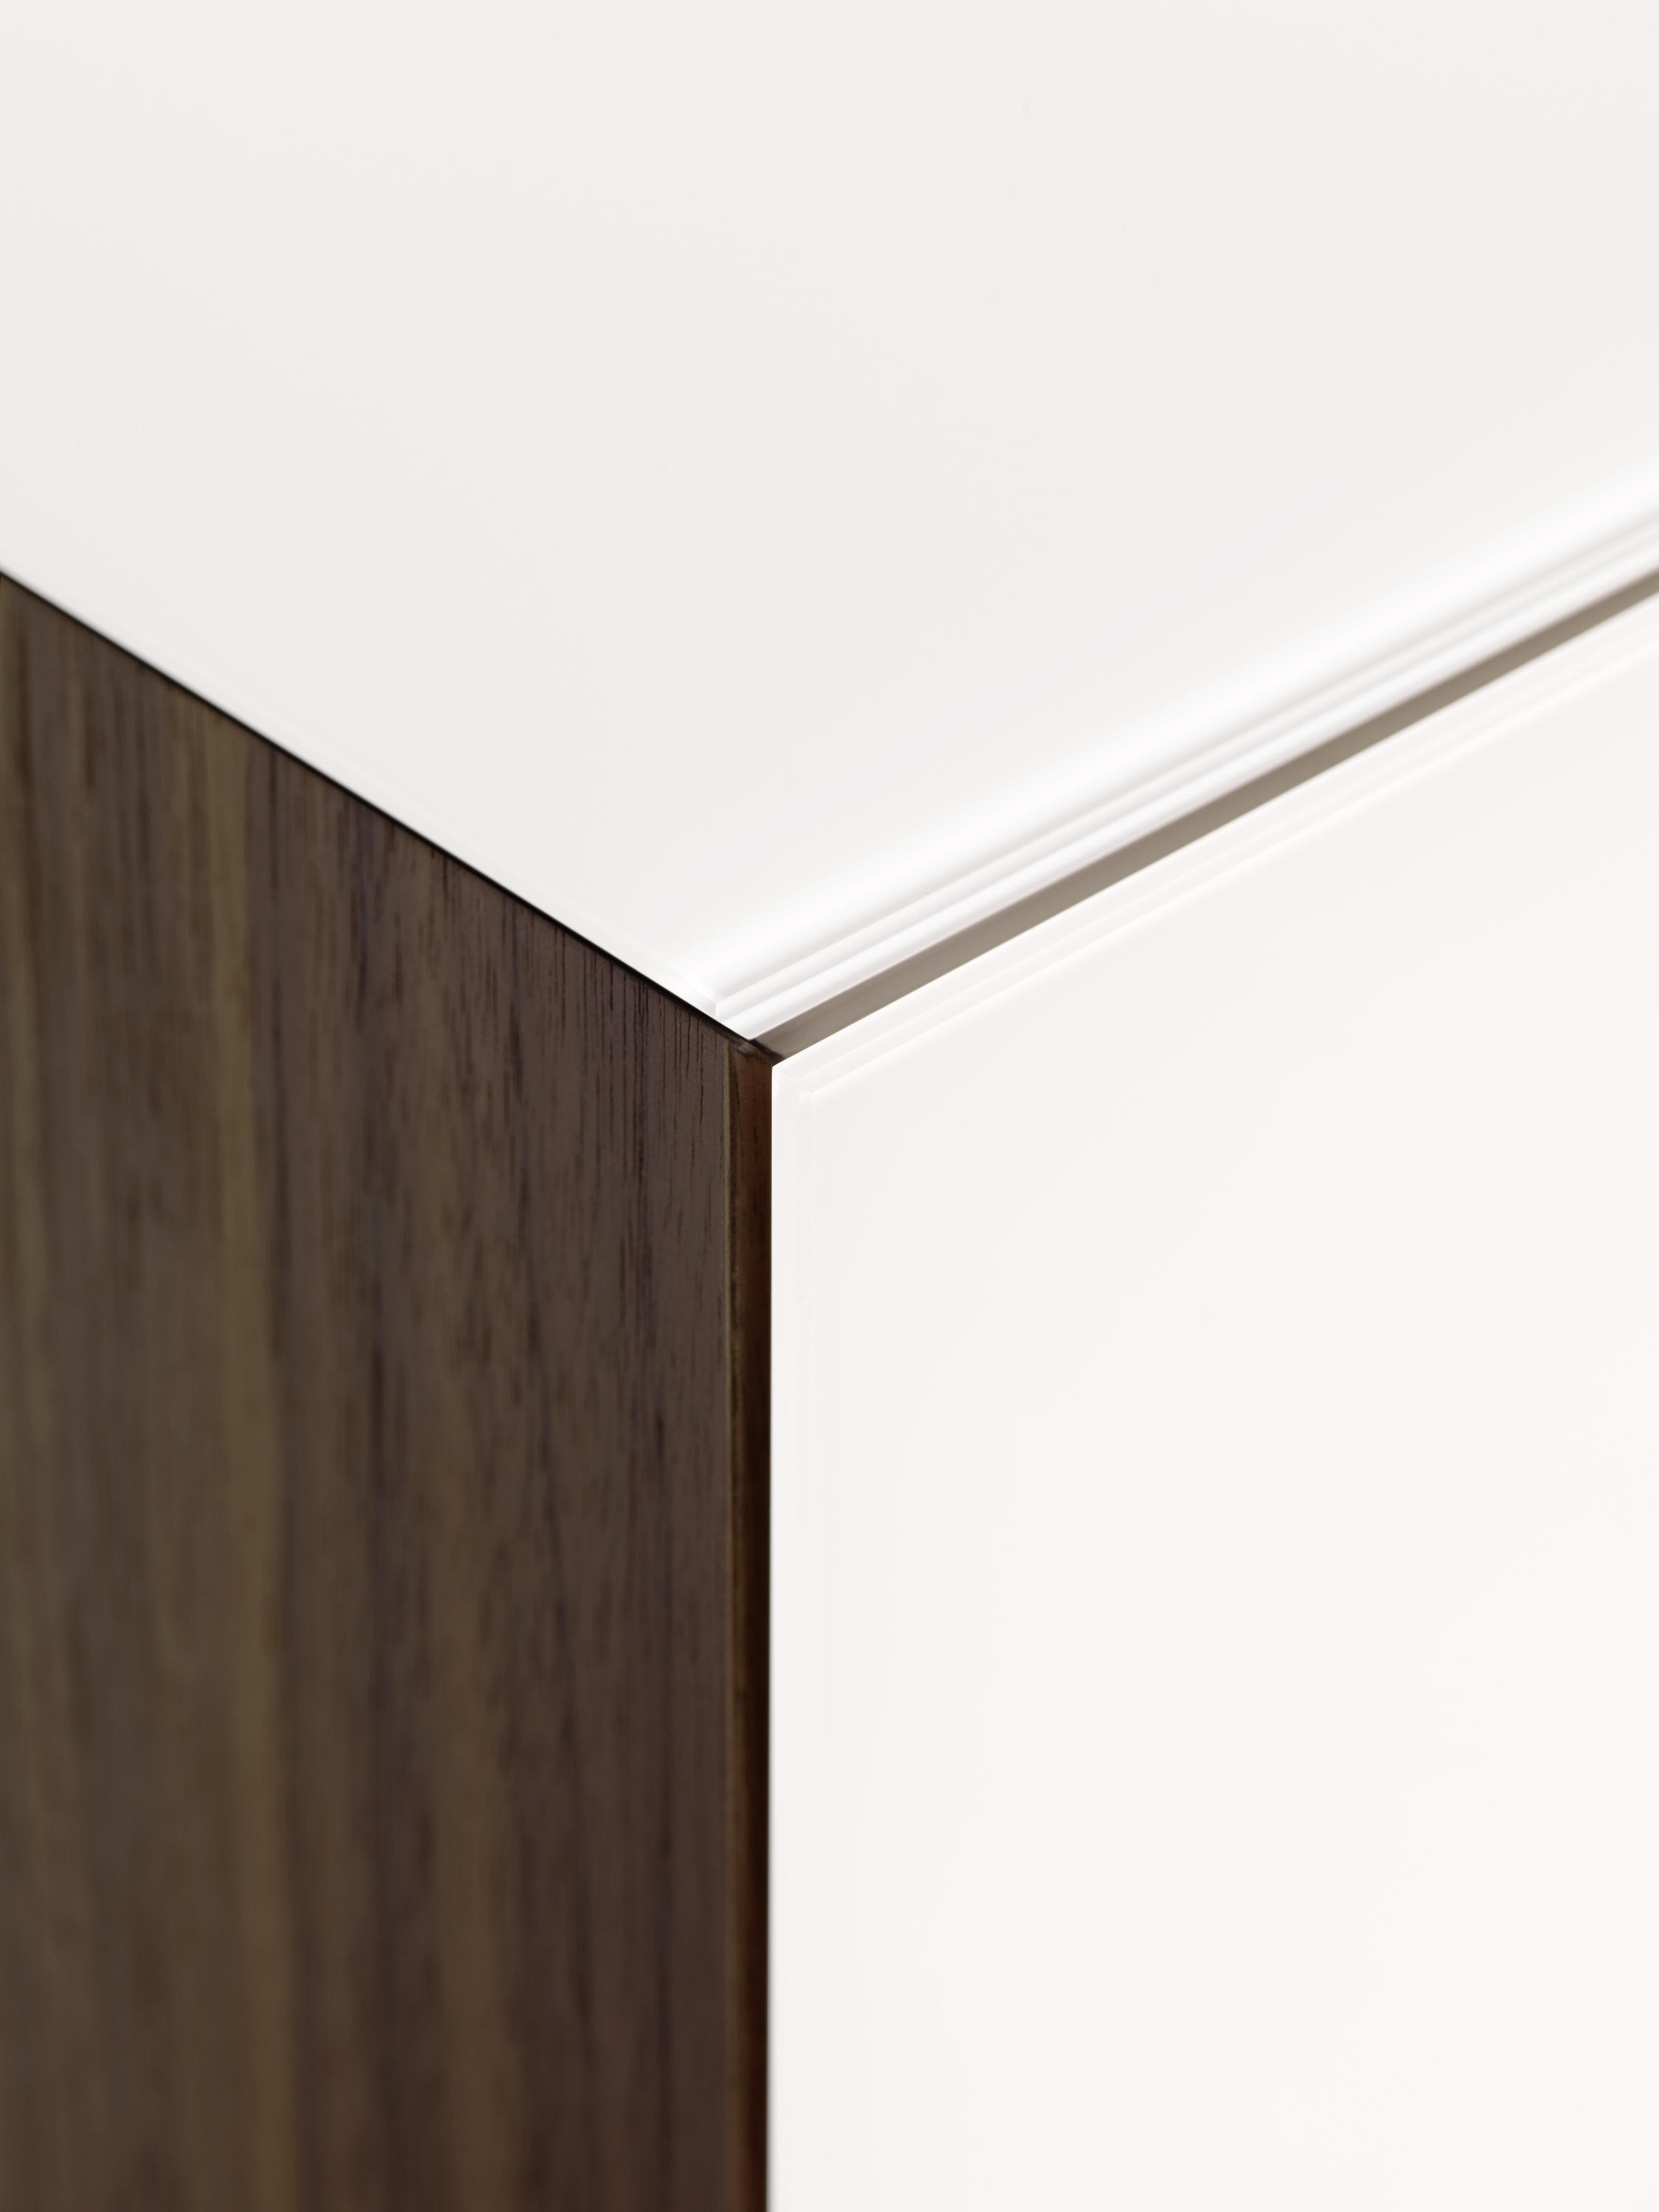 FORMART S2 - Sideboards from fraubrunnen | Architonic